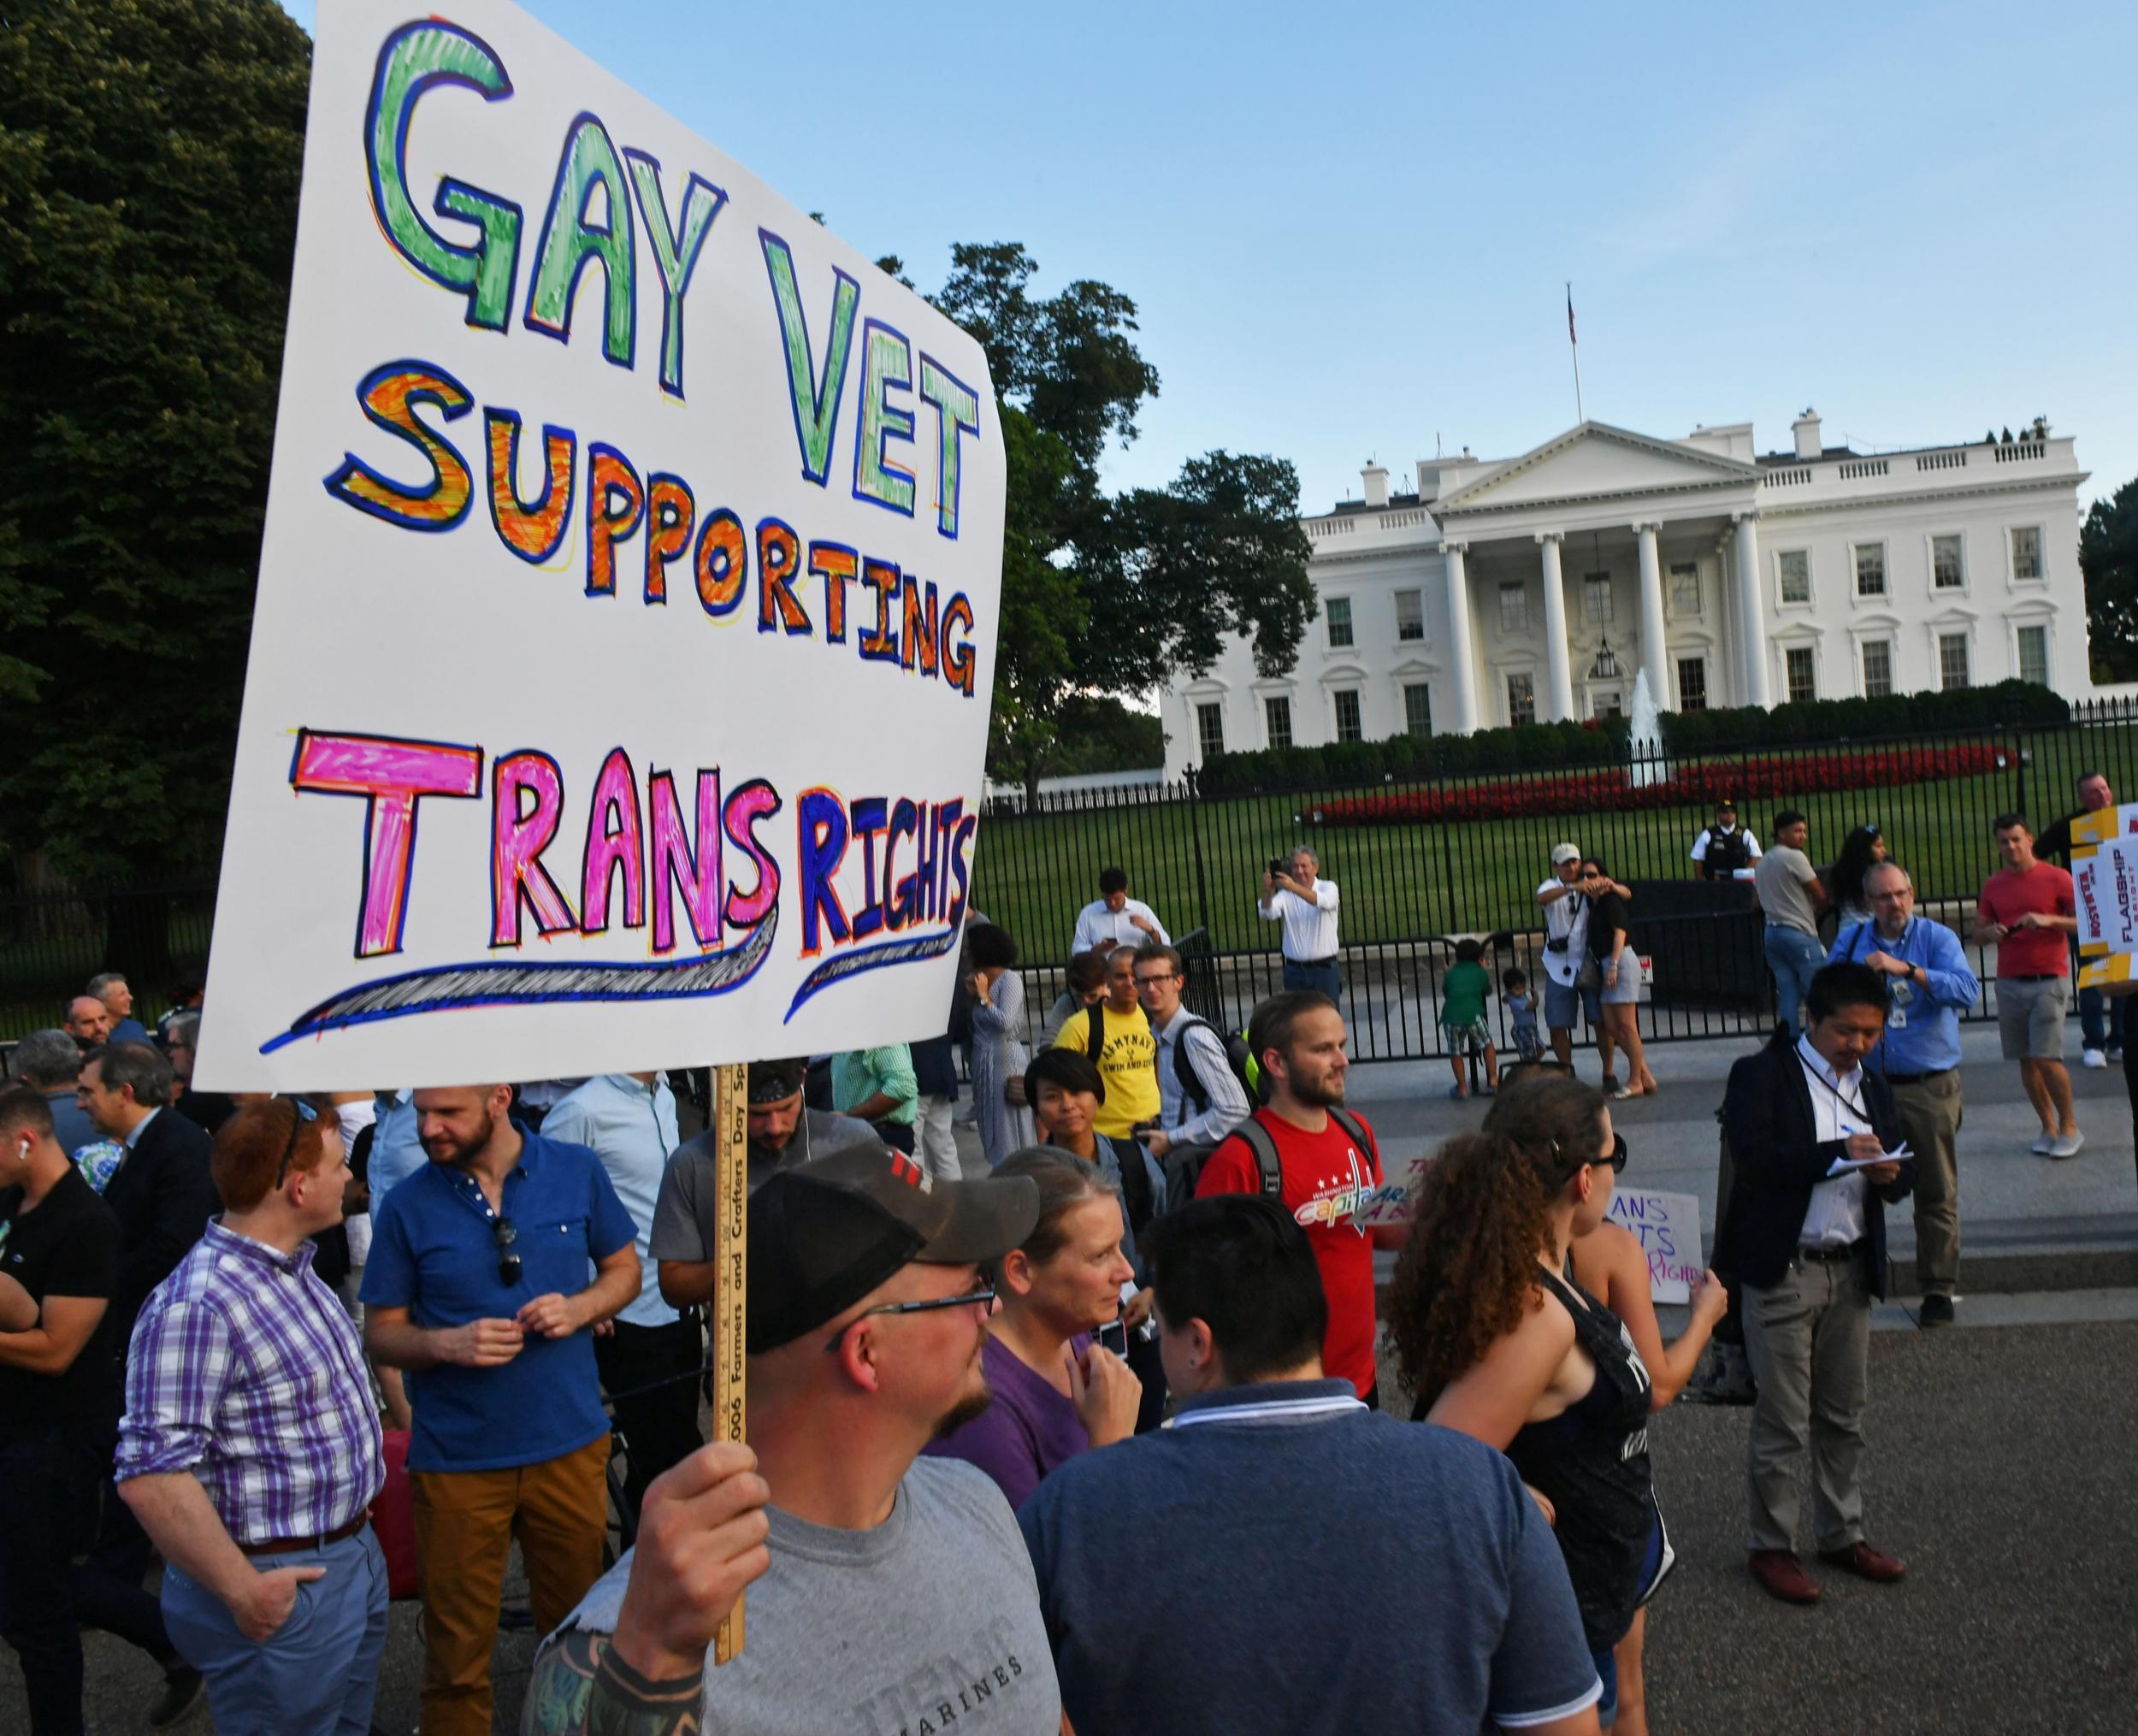 Protesters gather in front of the White House after Donald Trump announces his ban on transgender troops